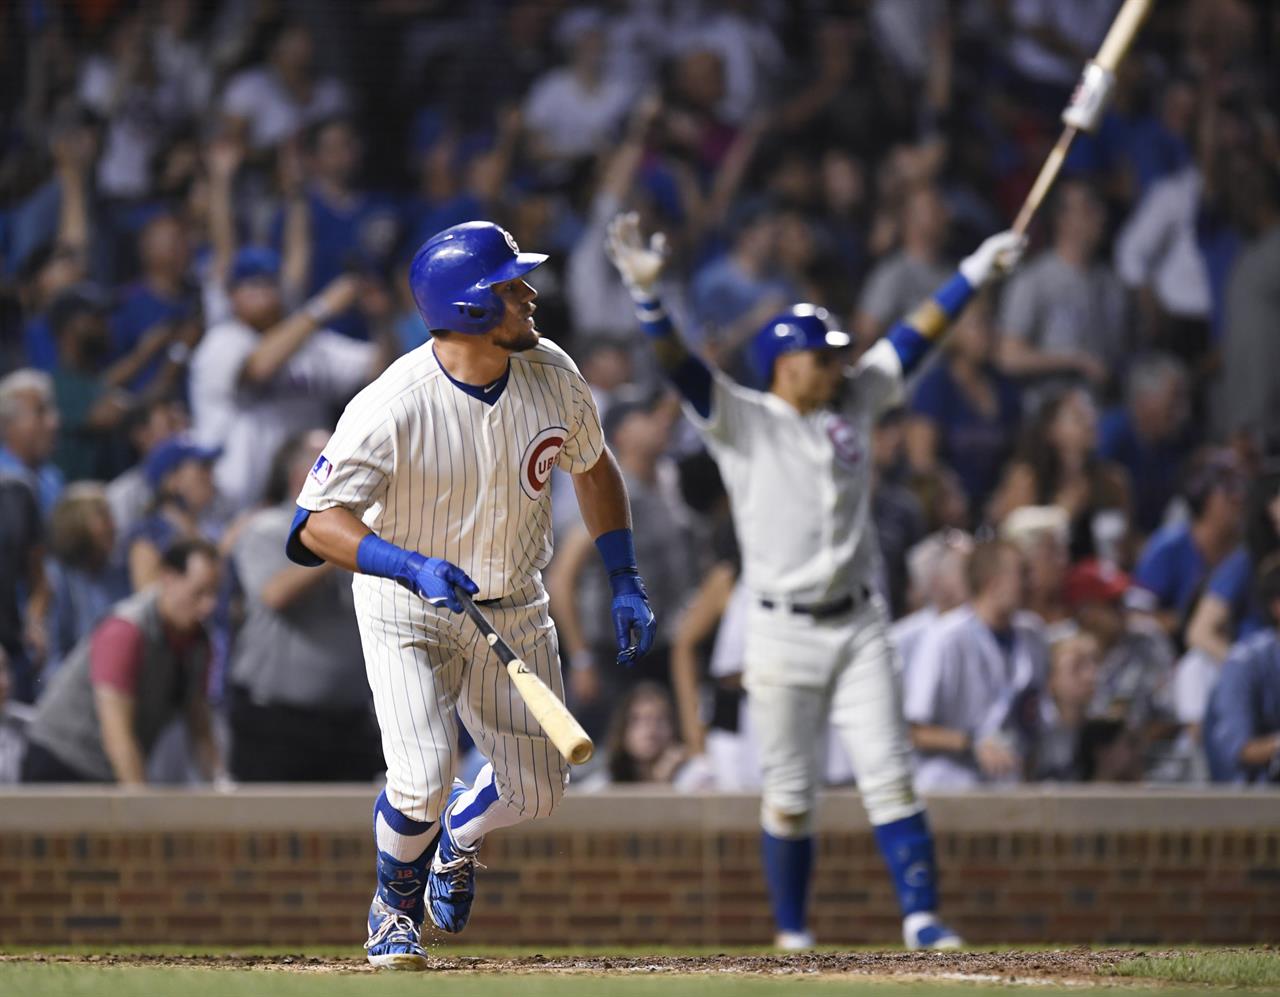 Schwarber S Homer In 10th Gives Cubs 4 3 Win Over Reds